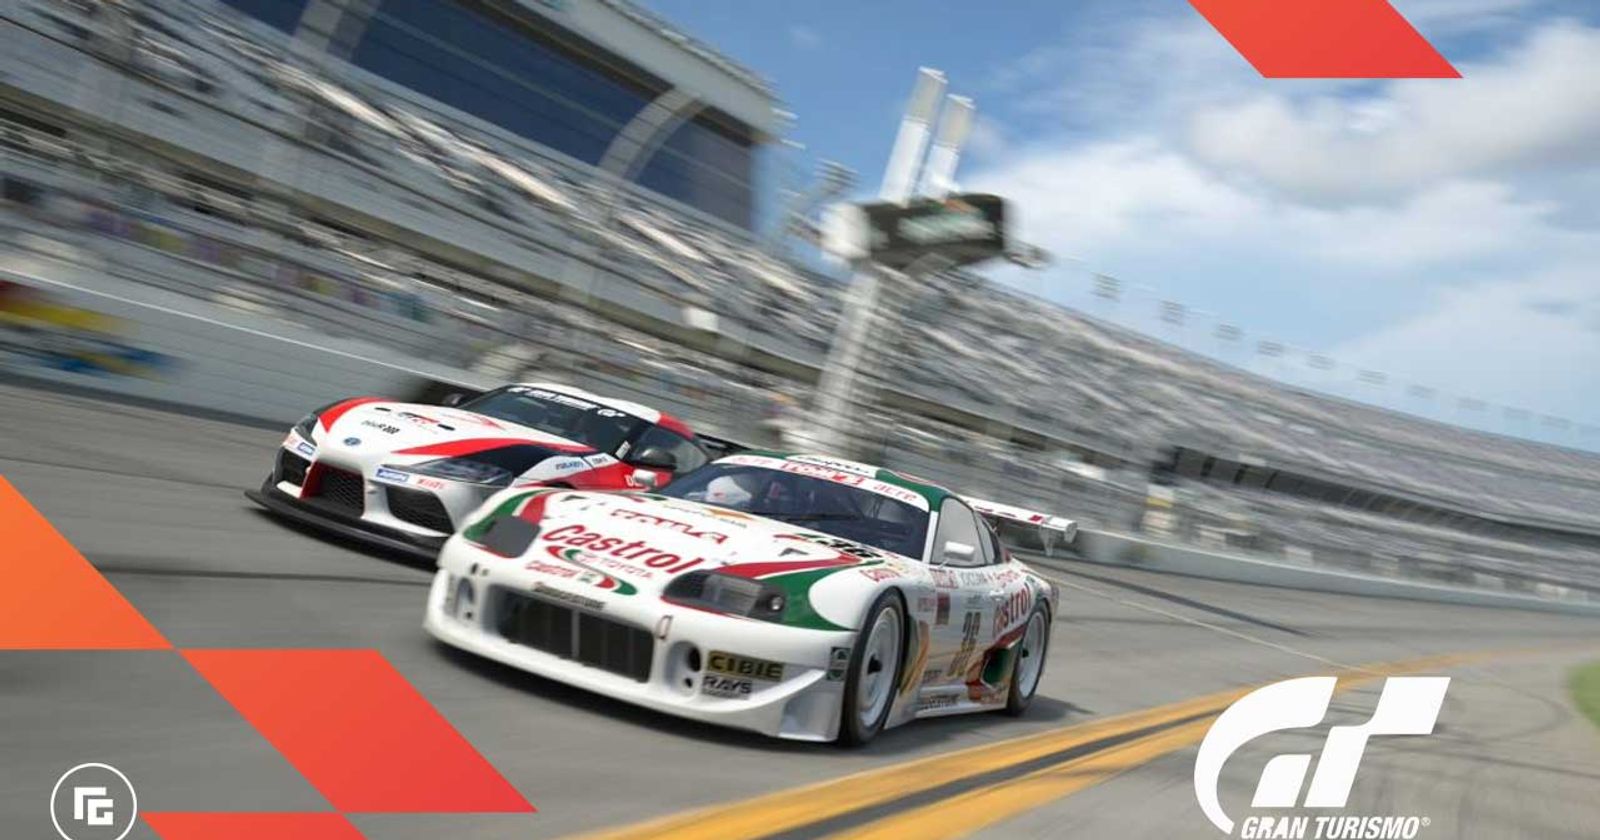 Gran Turismo 7 preview: A return to expansive, grindy, car